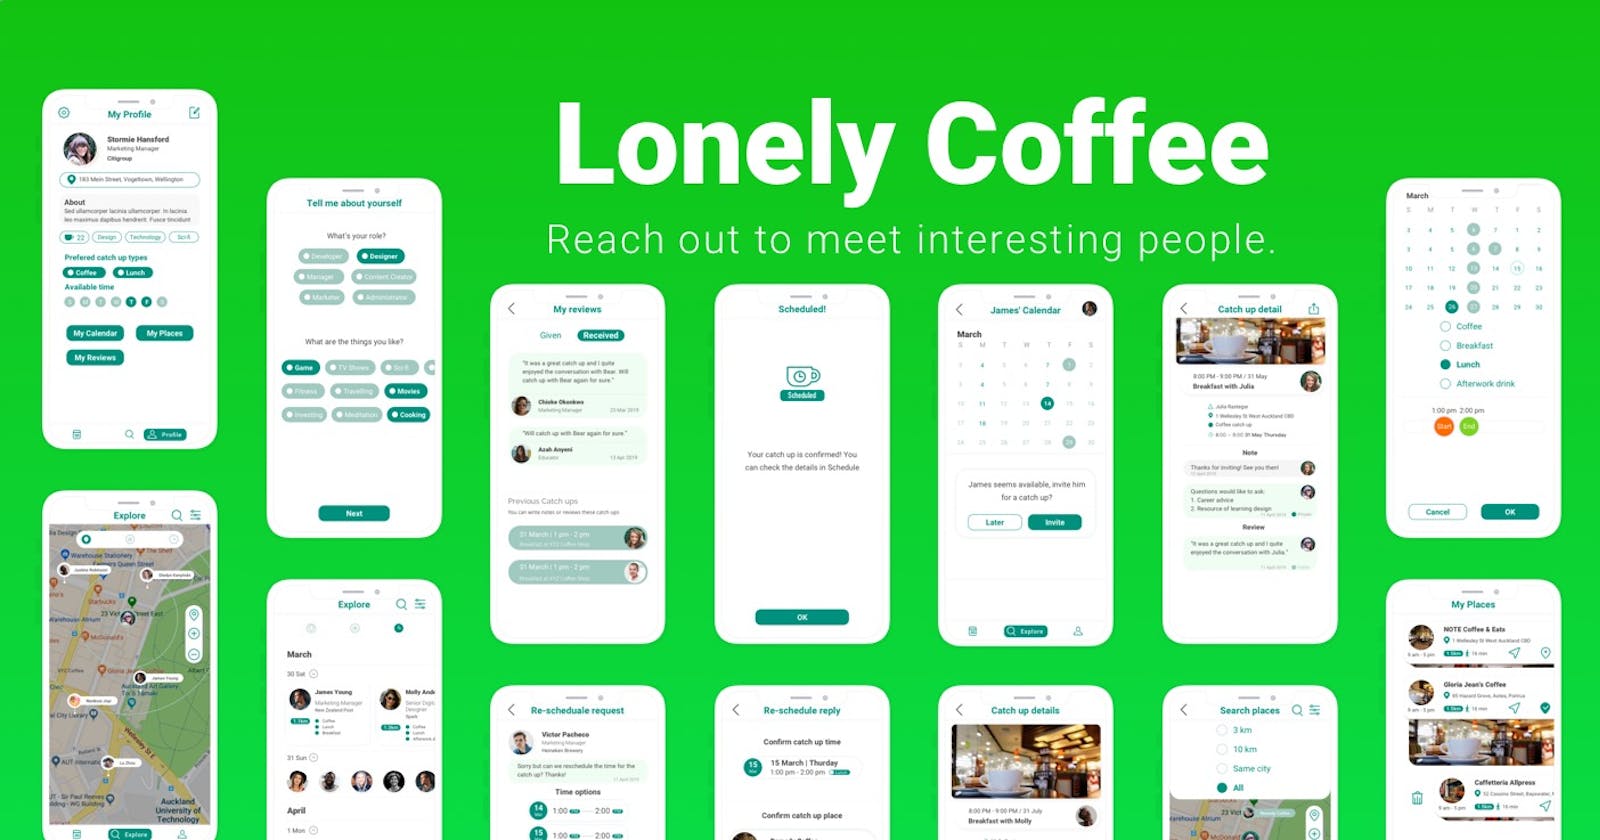 Case Study of Lonely Coffee - Let's Reach Out to Meet Interesting People🤓